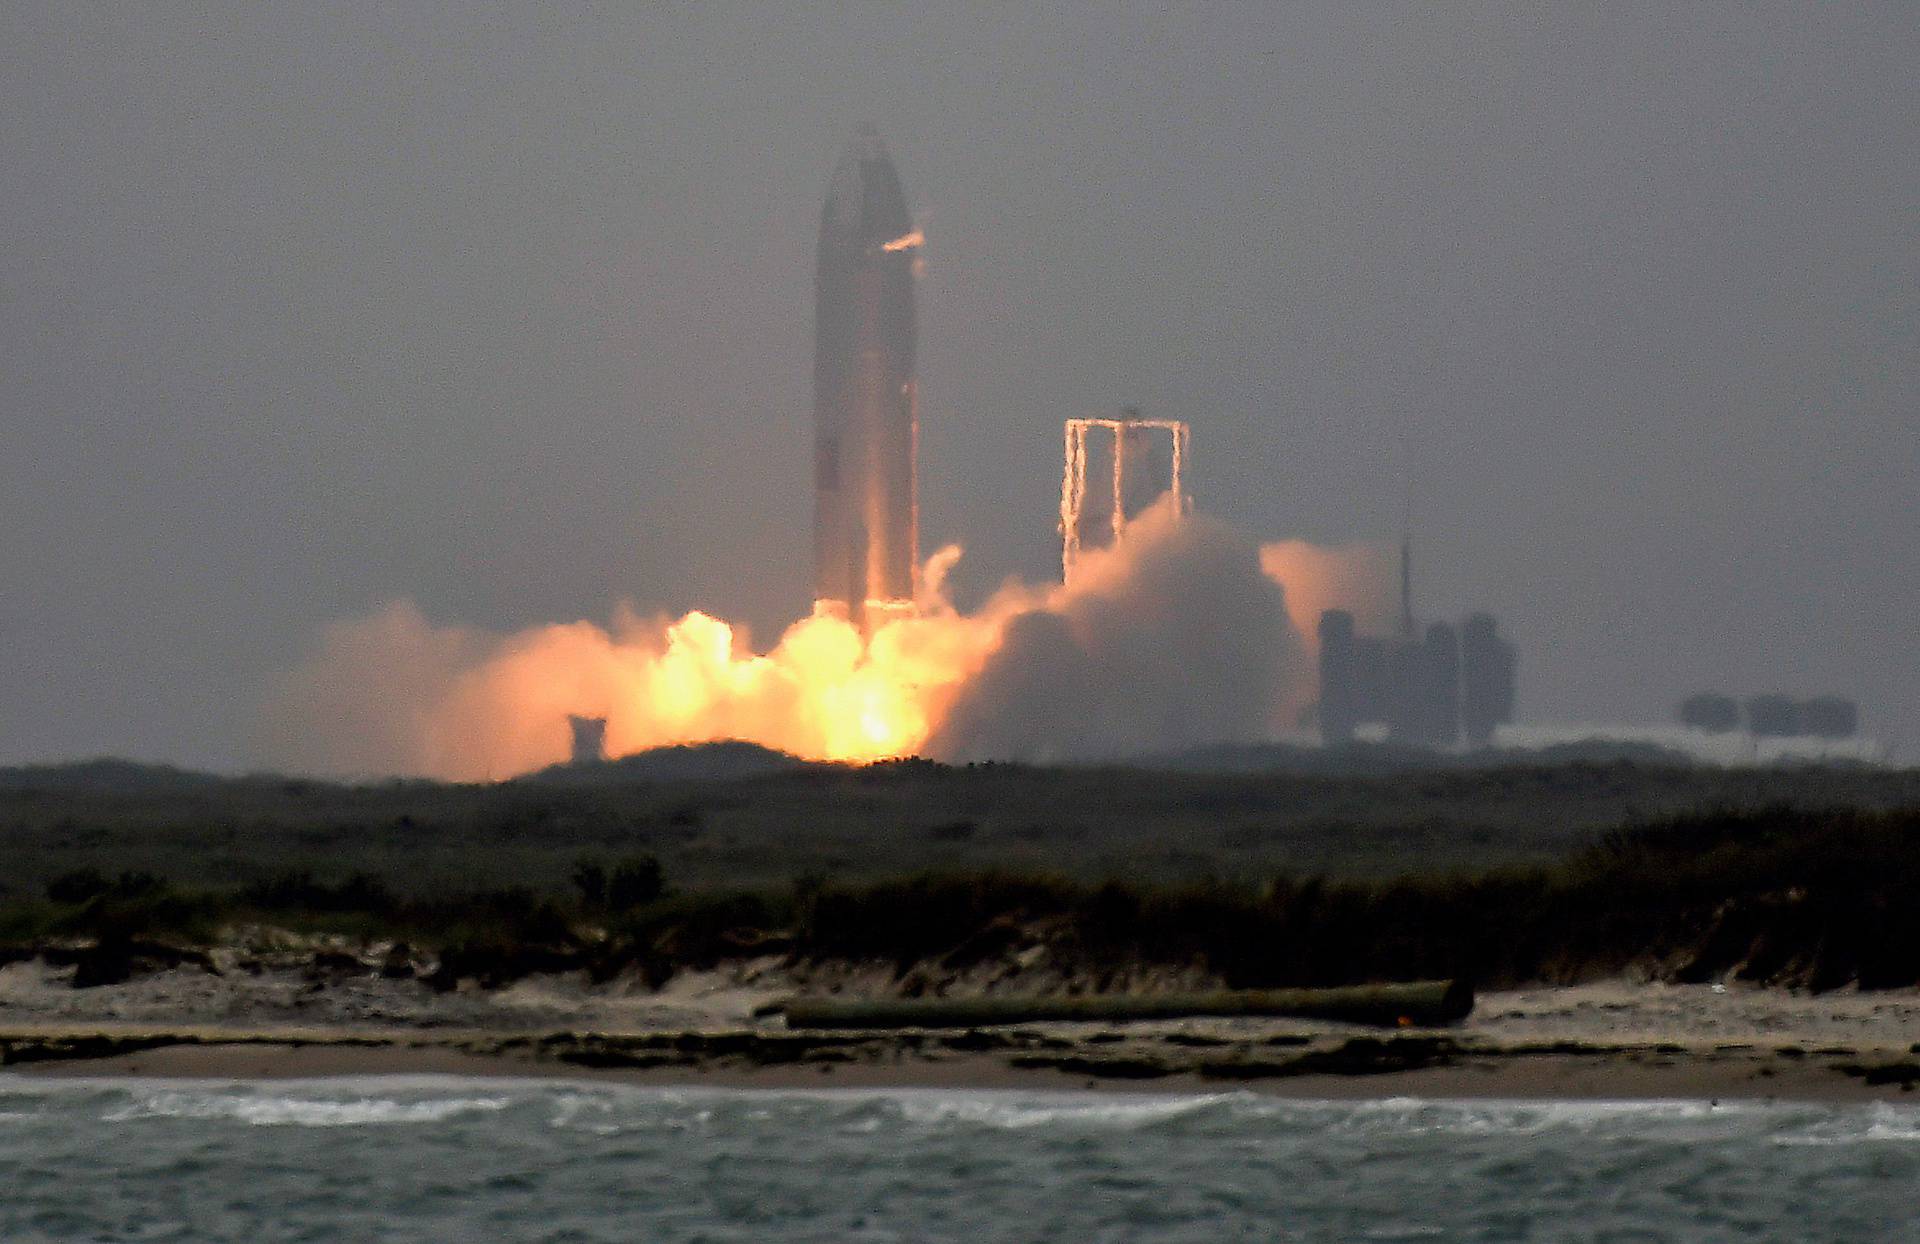 SpaceX conducts test launch of SN15 starship prototype from Boca Chica, Texas